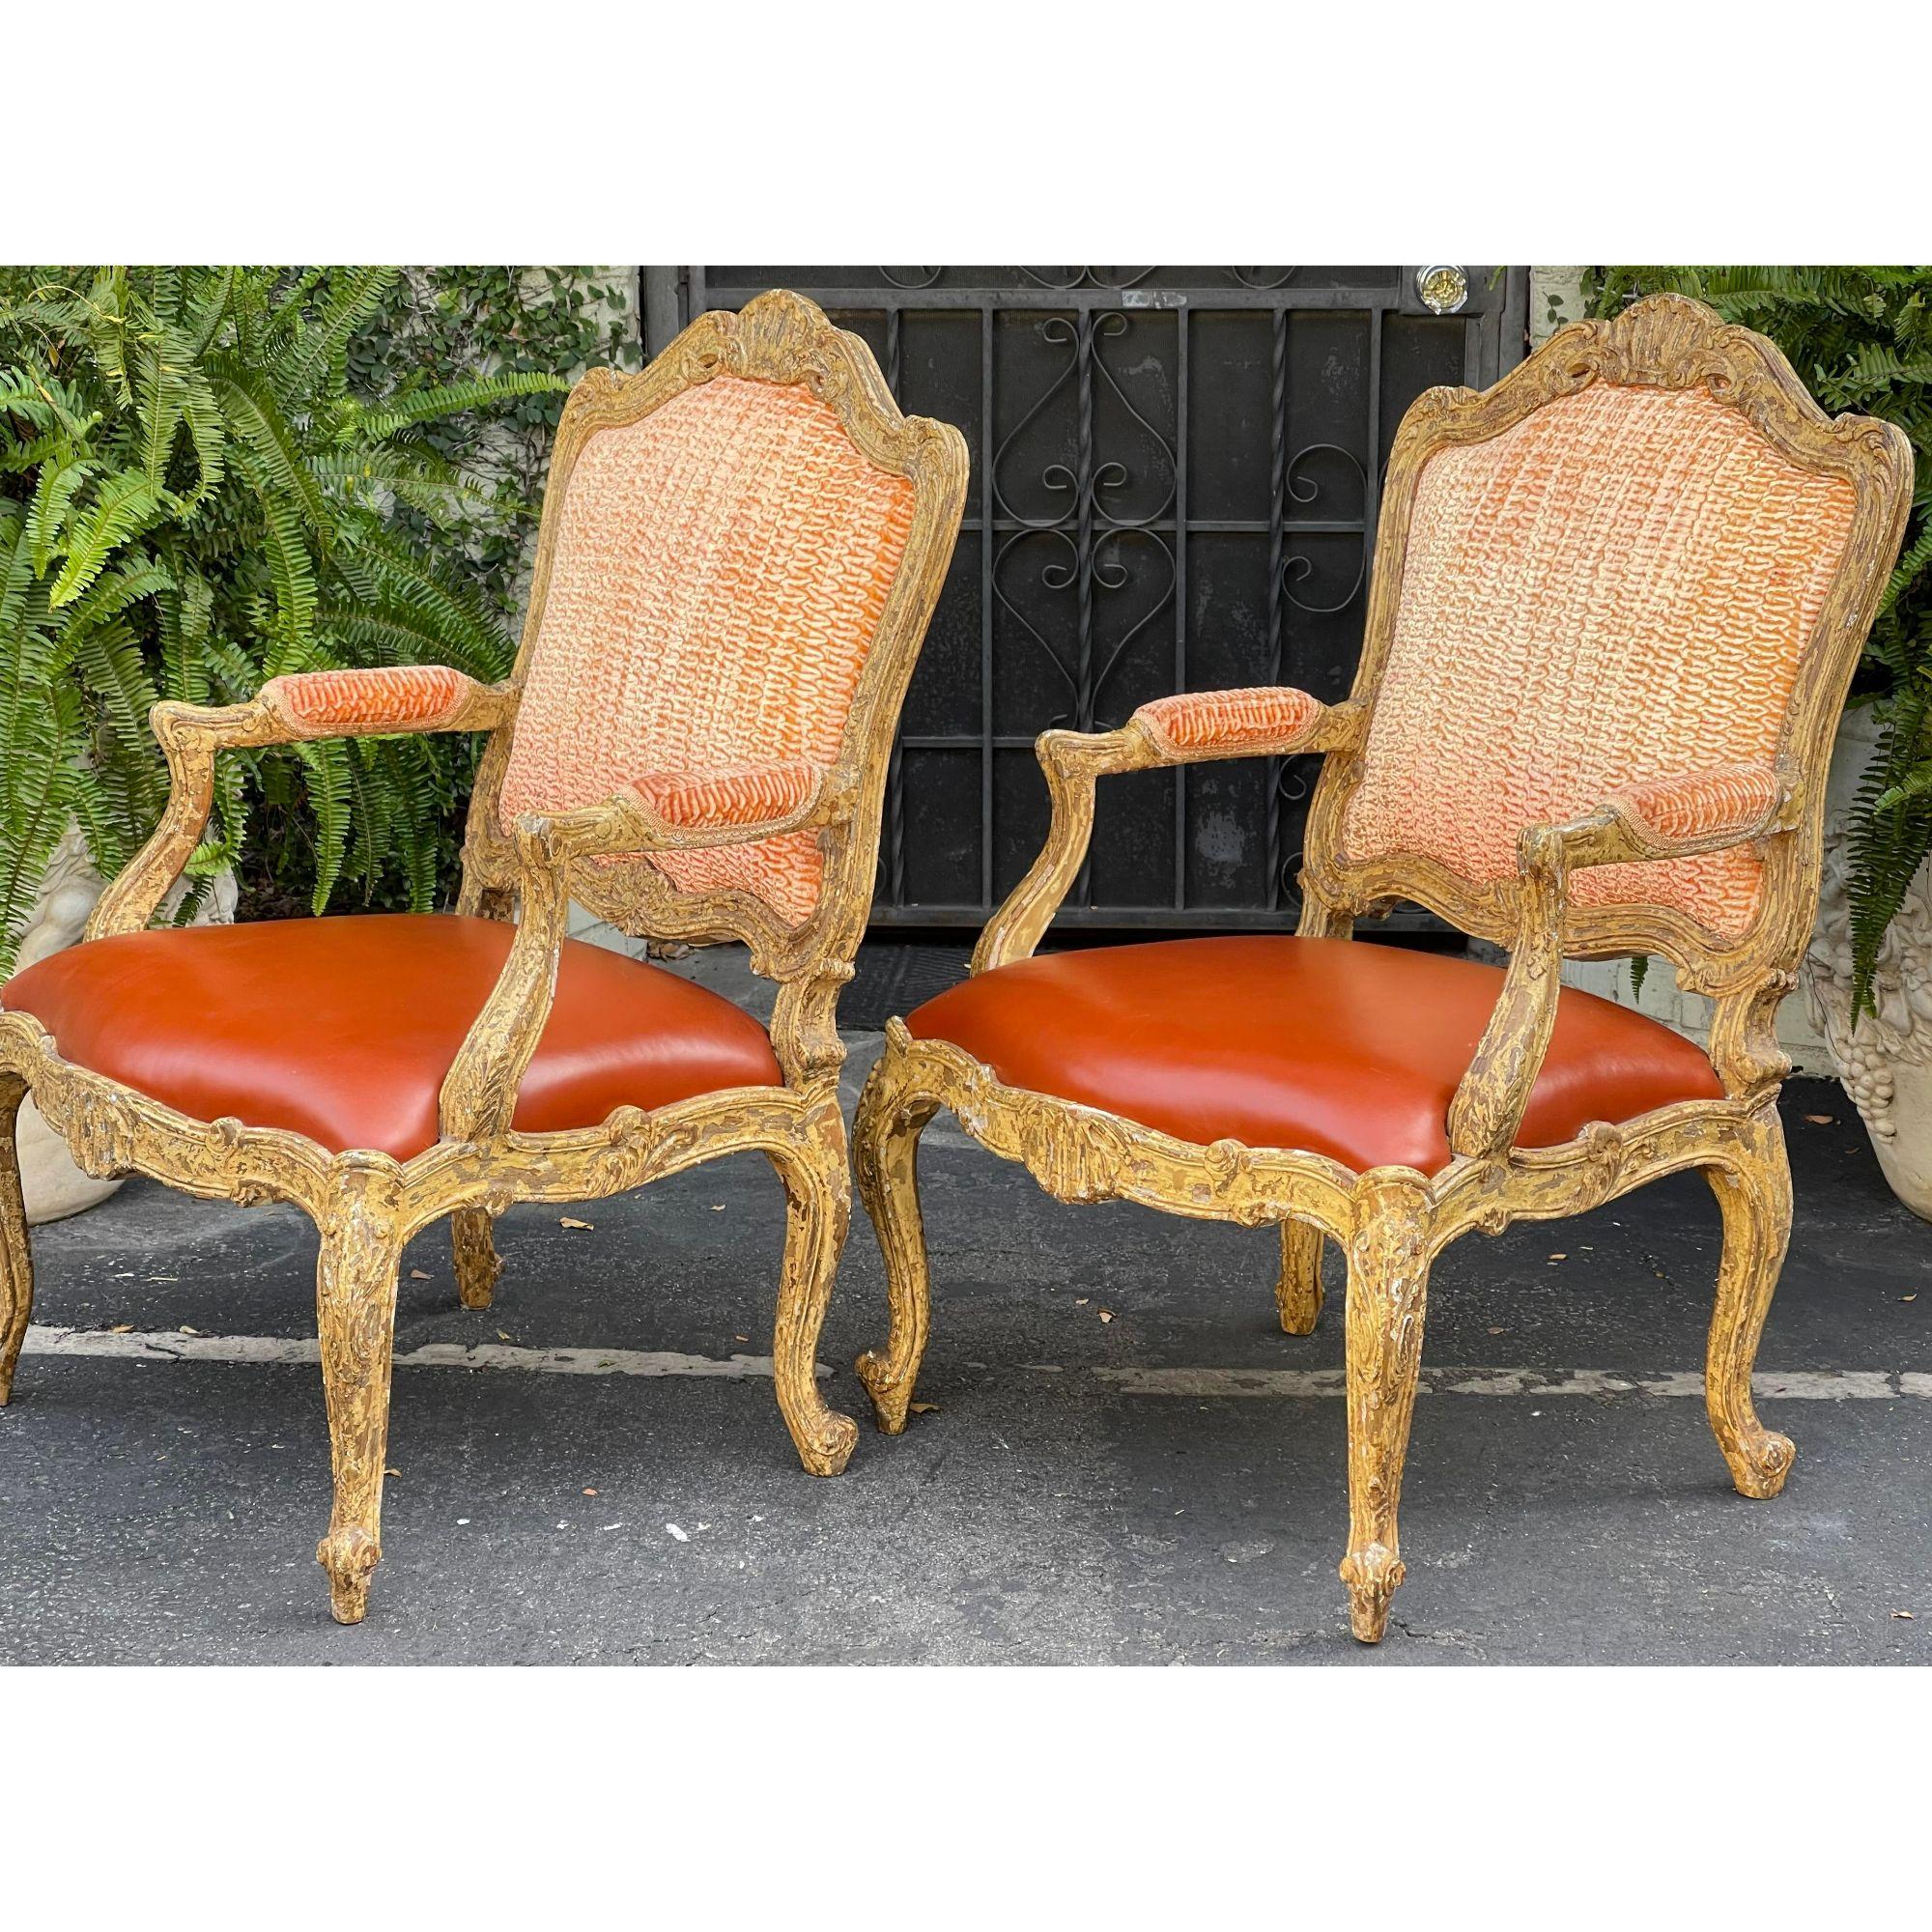 Giltwood Antique 18th Century Style Venetian Orange Leather Armchair For Sale